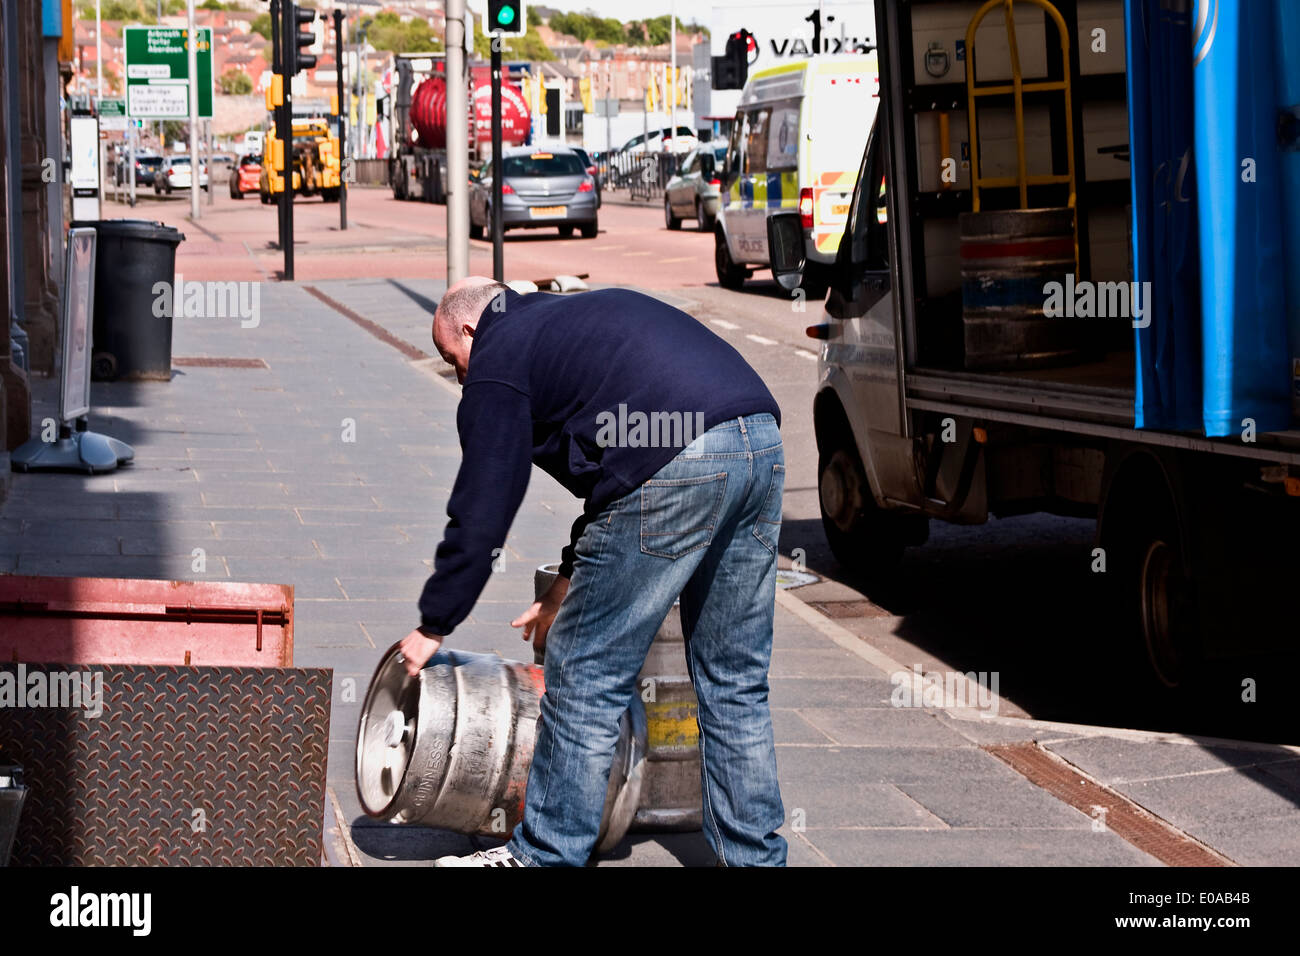 Worker unloading an aluminum Keg of Guinness Stout Ale from a delivery truck outside a Scottish pub in Dundee, UK Stock Photo